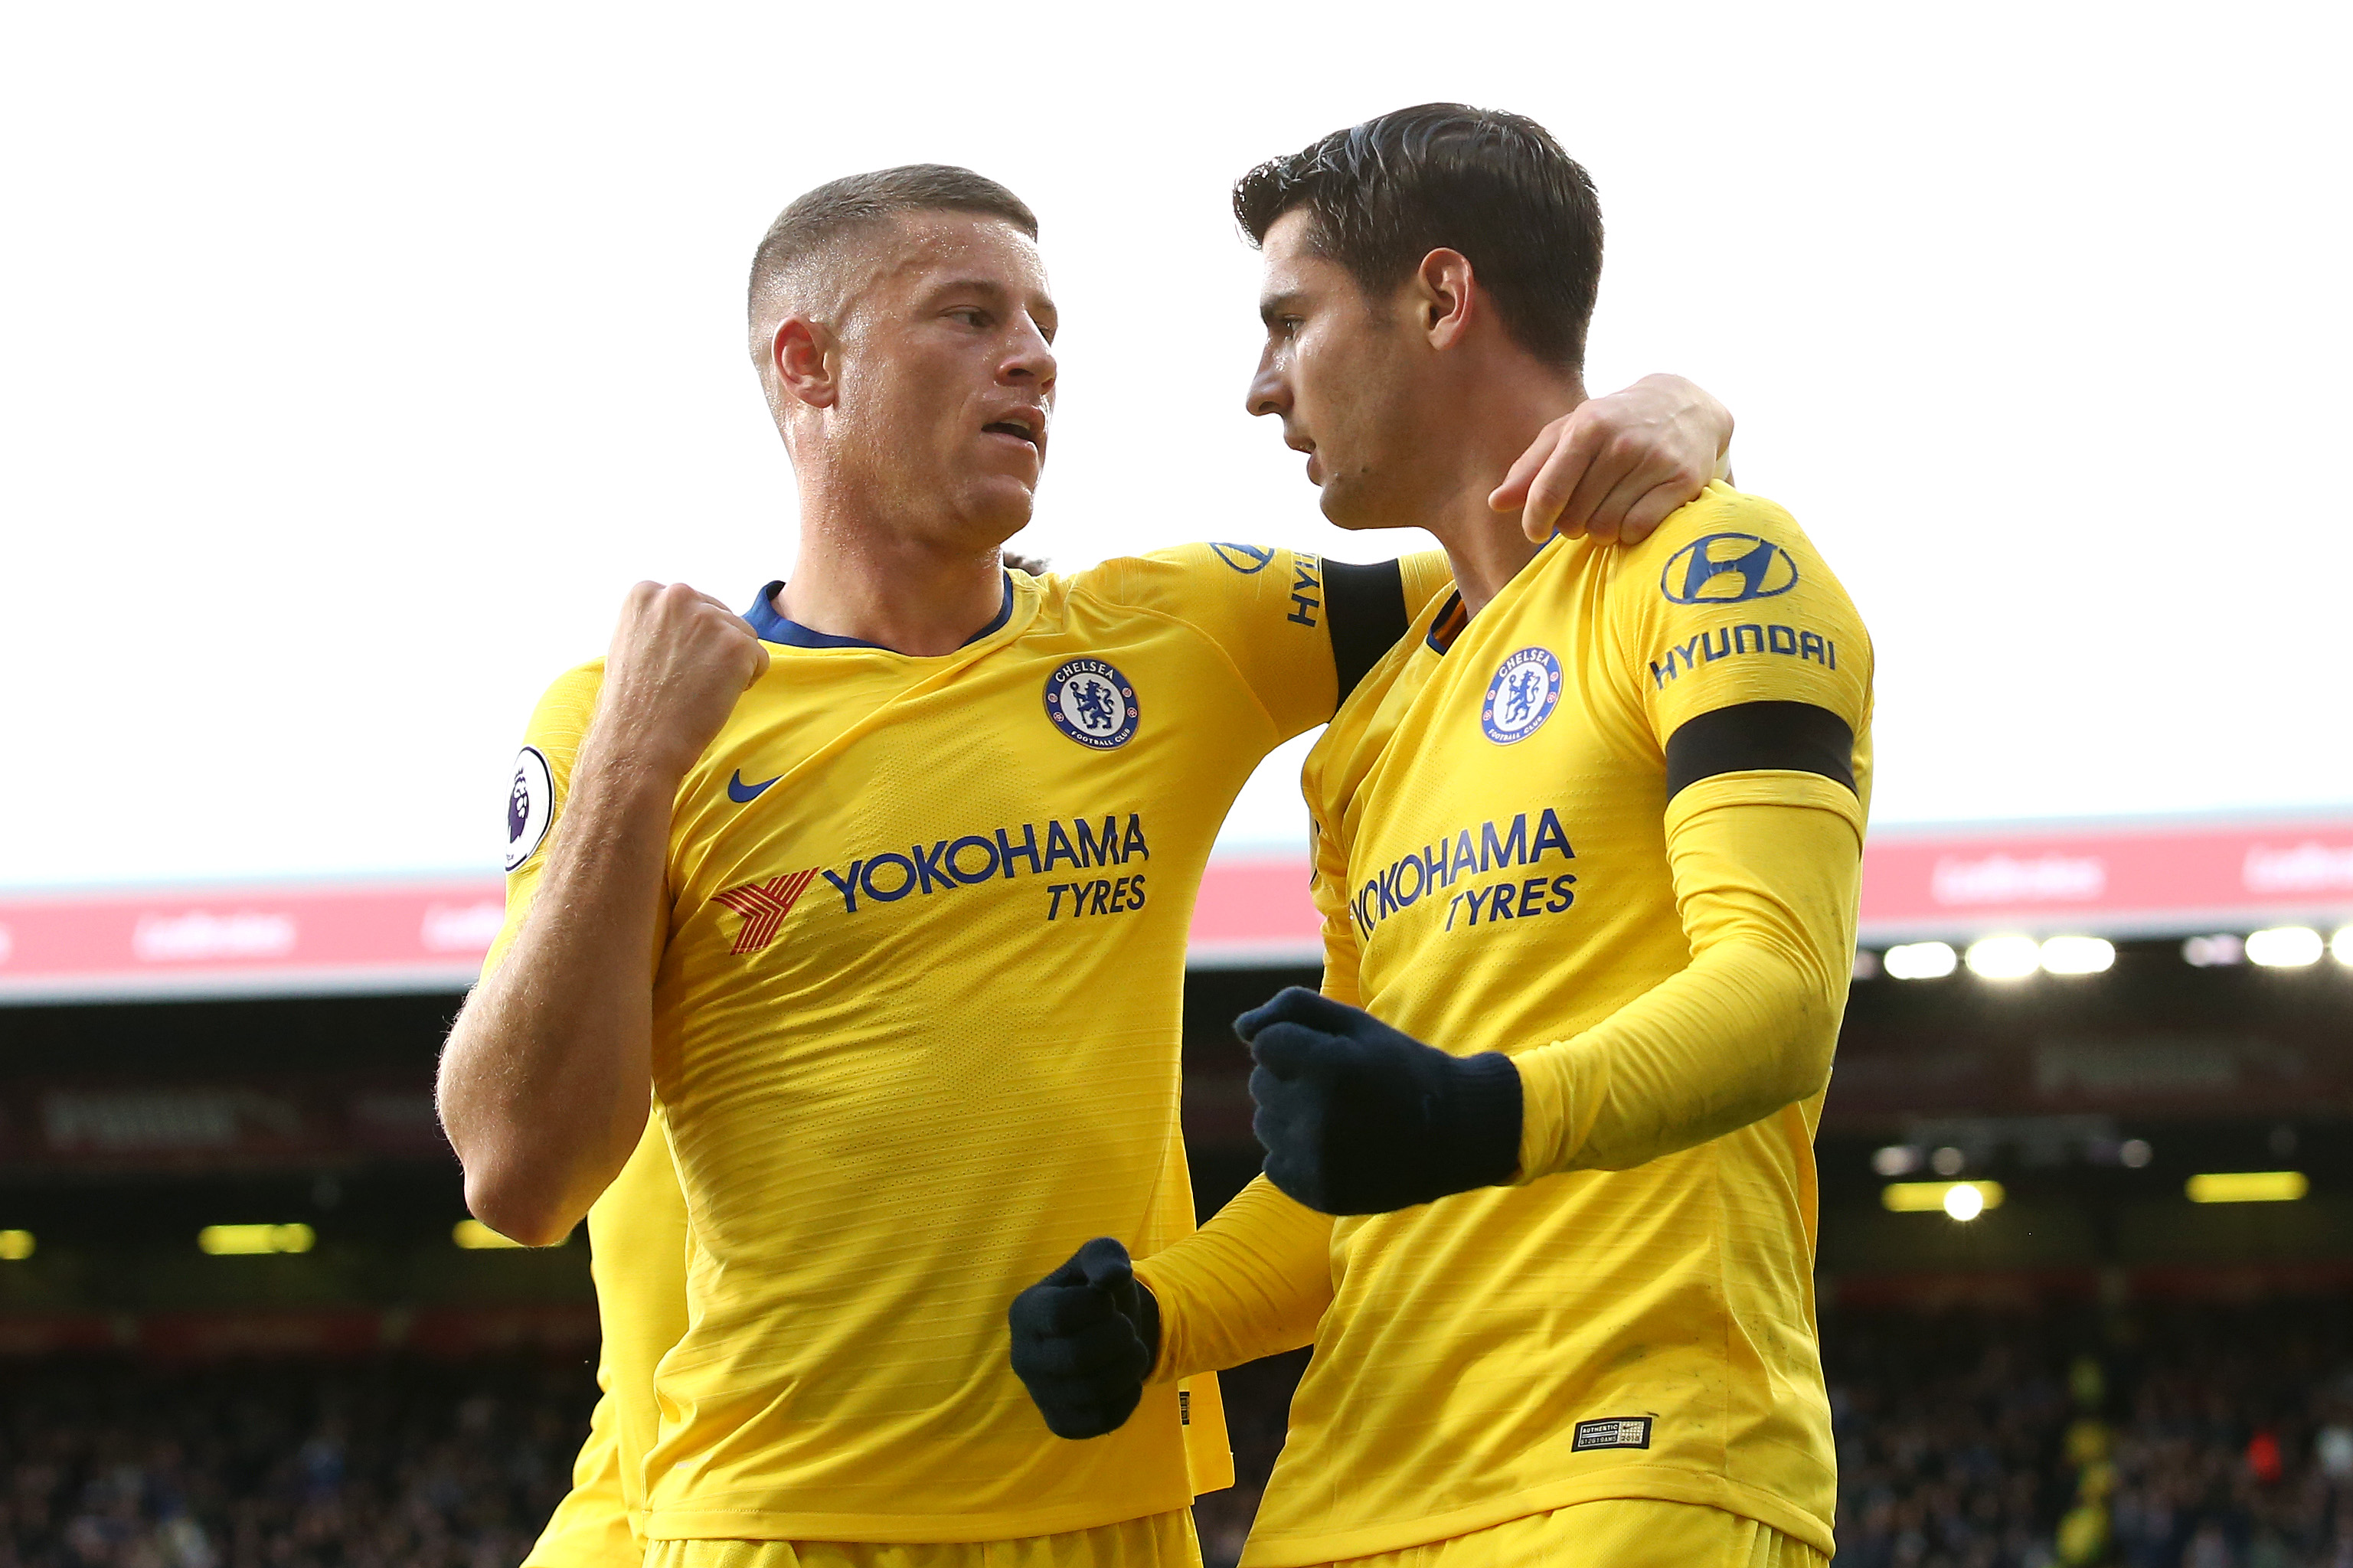 BURNLEY, ENGLAND - OCTOBER 28:  Alvaro Morata of Chelsea celebrates with Ross Barkley after scoring his teams first goal during the Premier League match between Burnley FC and Chelsea FC at Turf Moor on October 28, 2018 in Burnley, United Kingdom.  (Photo by Jan Kruger/Getty Images)